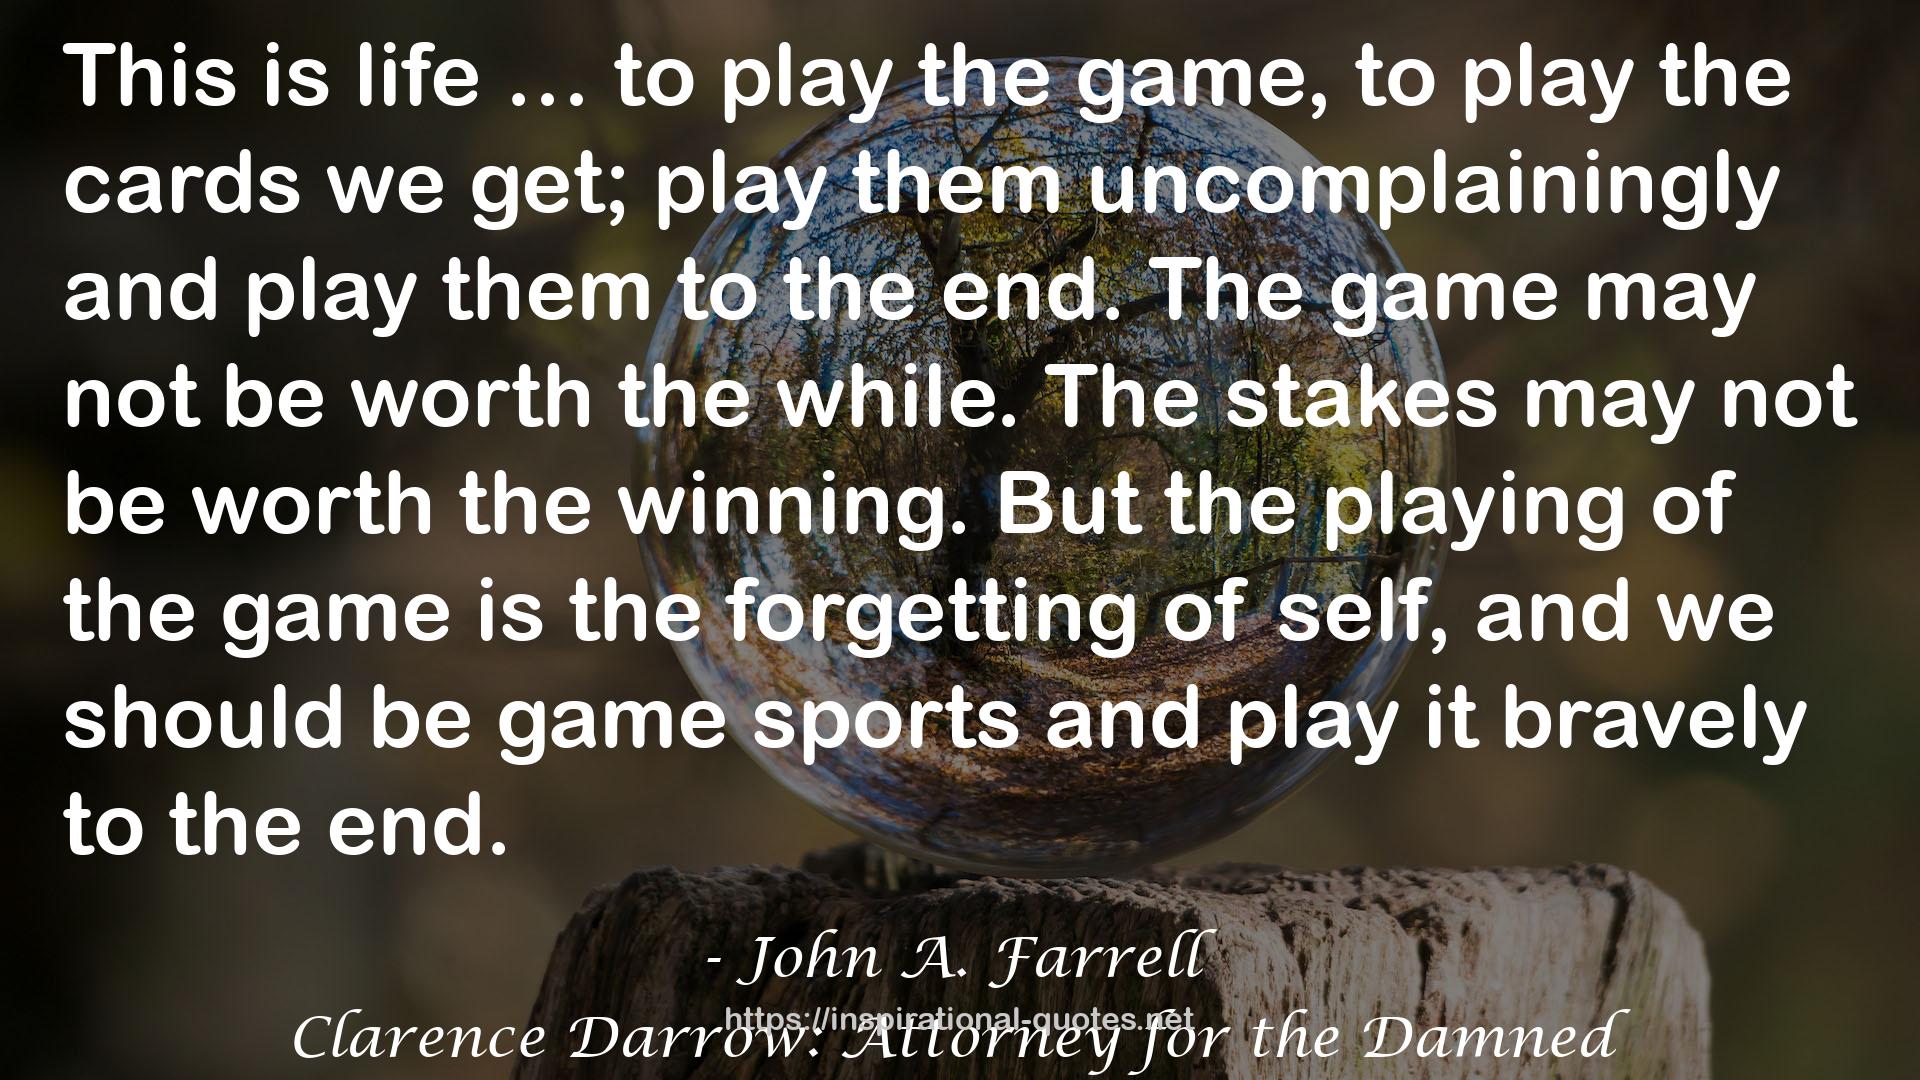 Clarence Darrow: Attorney for the Damned QUOTES